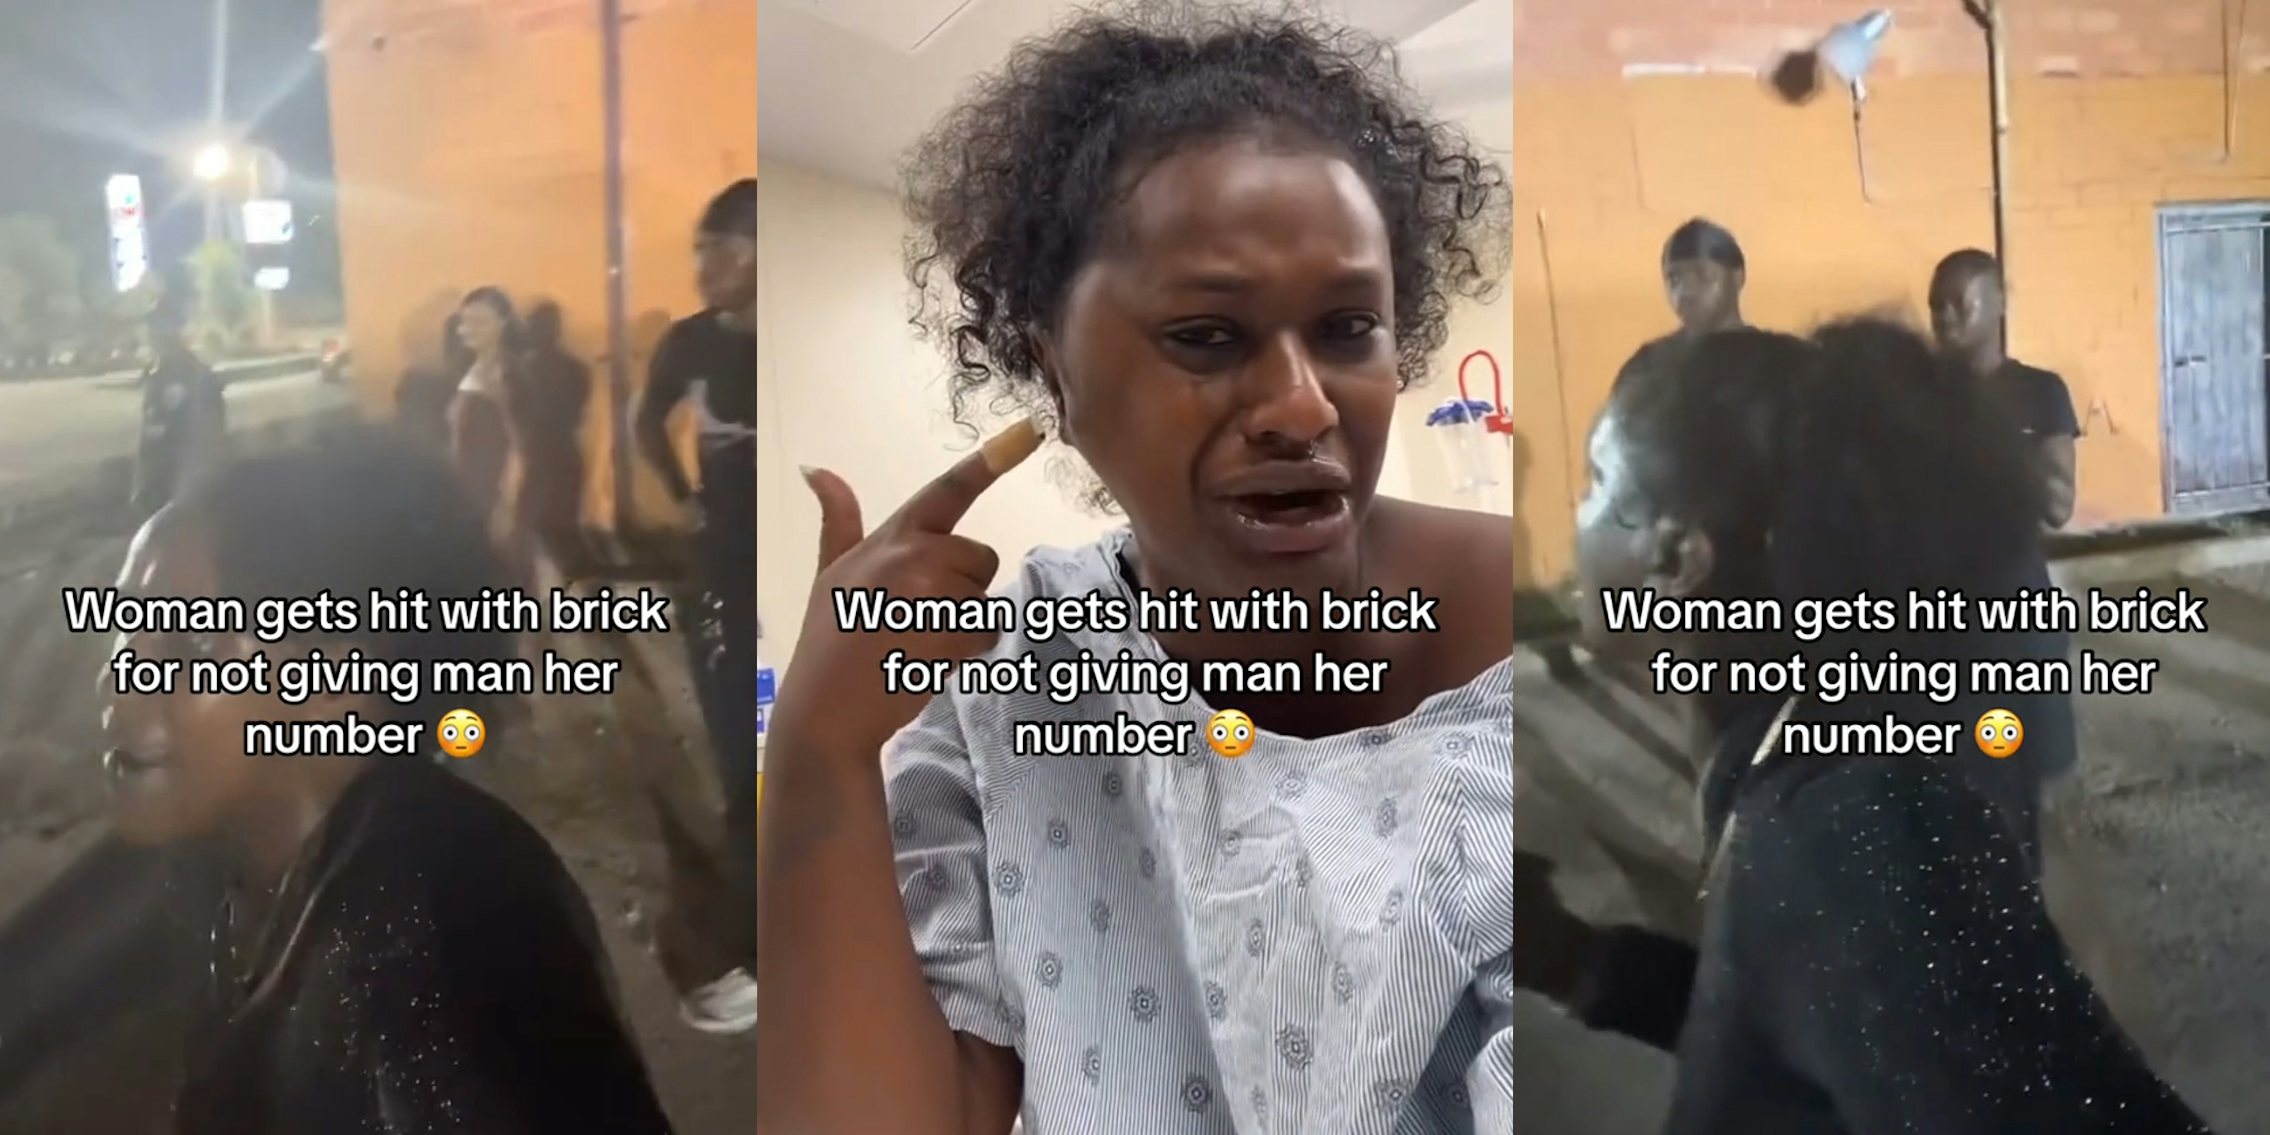 woman in lot with people with caption 'Woman gets hit with brick for not giving man her number' (l) woman in hospital with caption 'Woman gets hit with brick for not giving man her number' (c) woman in lot with people with caption 'Woman gets hit with brick for not giving man her number' (r)